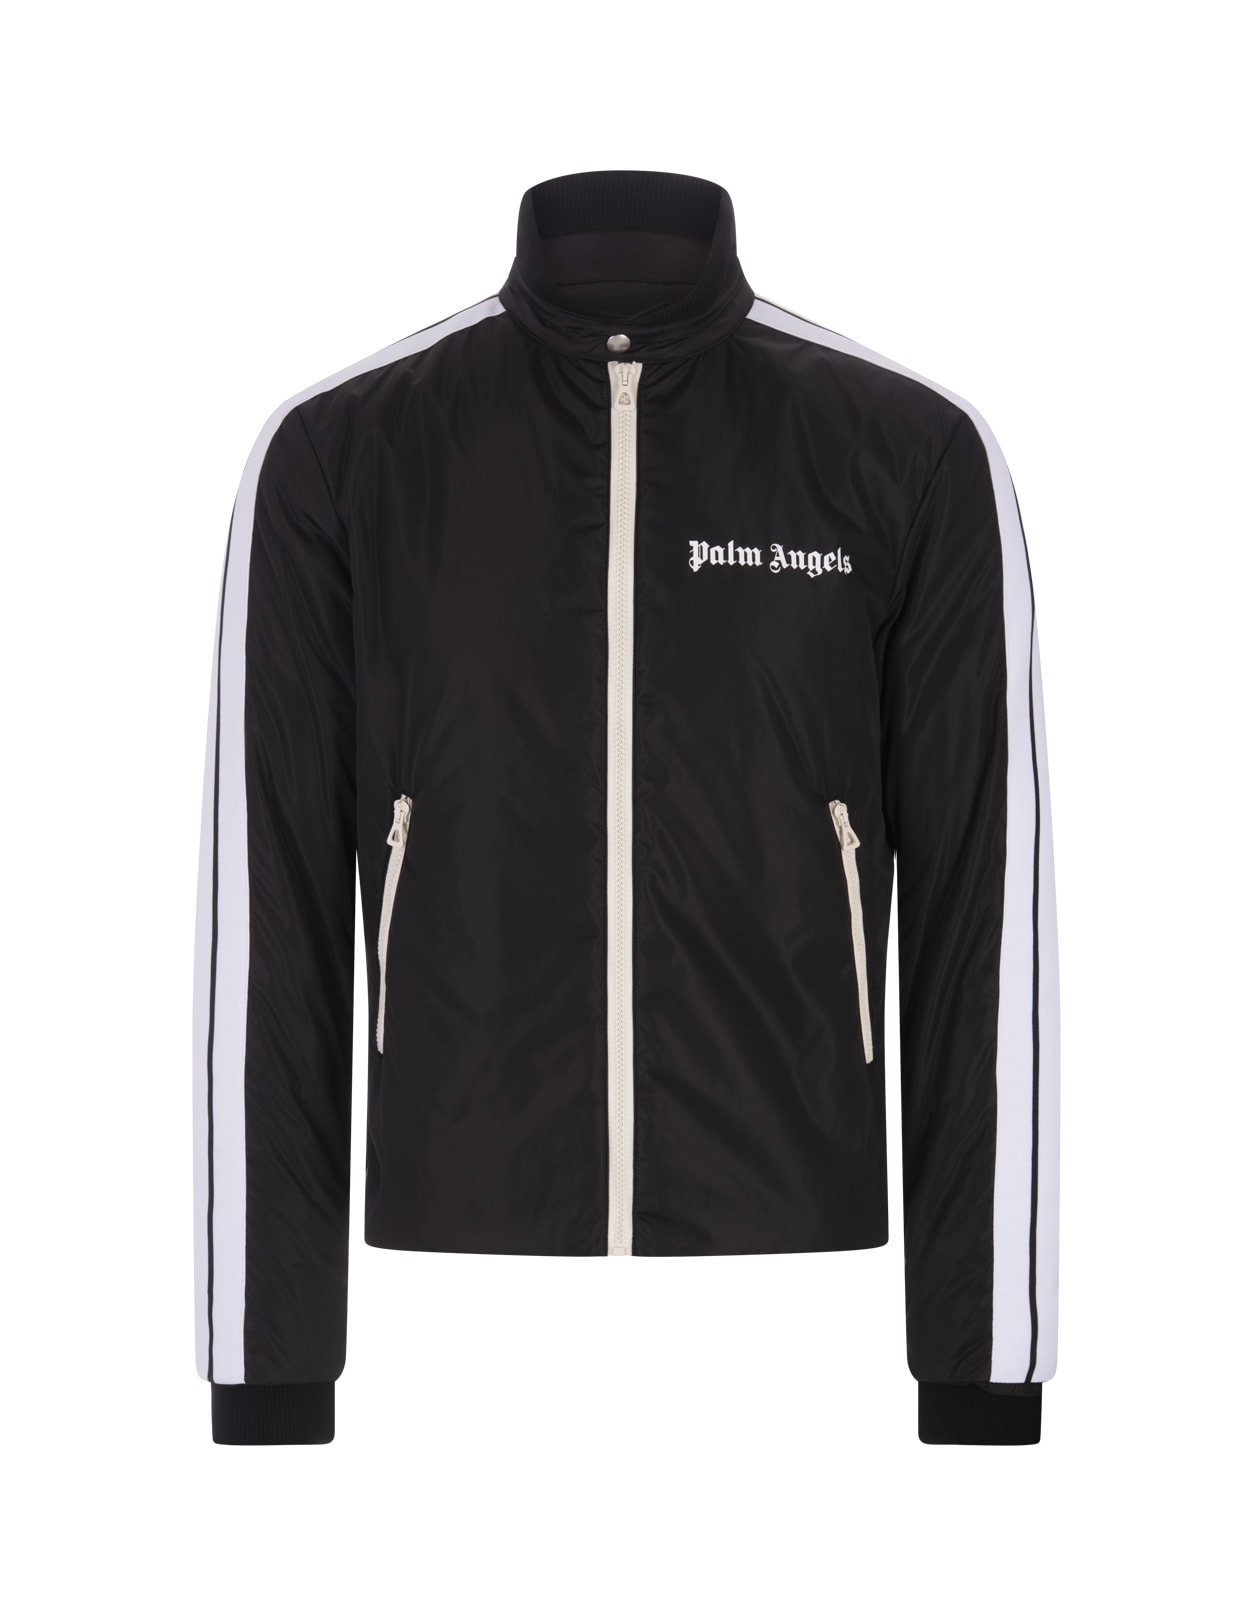 PALM ANGELS BLACK AND WHITE PADDED SPORT JACKET